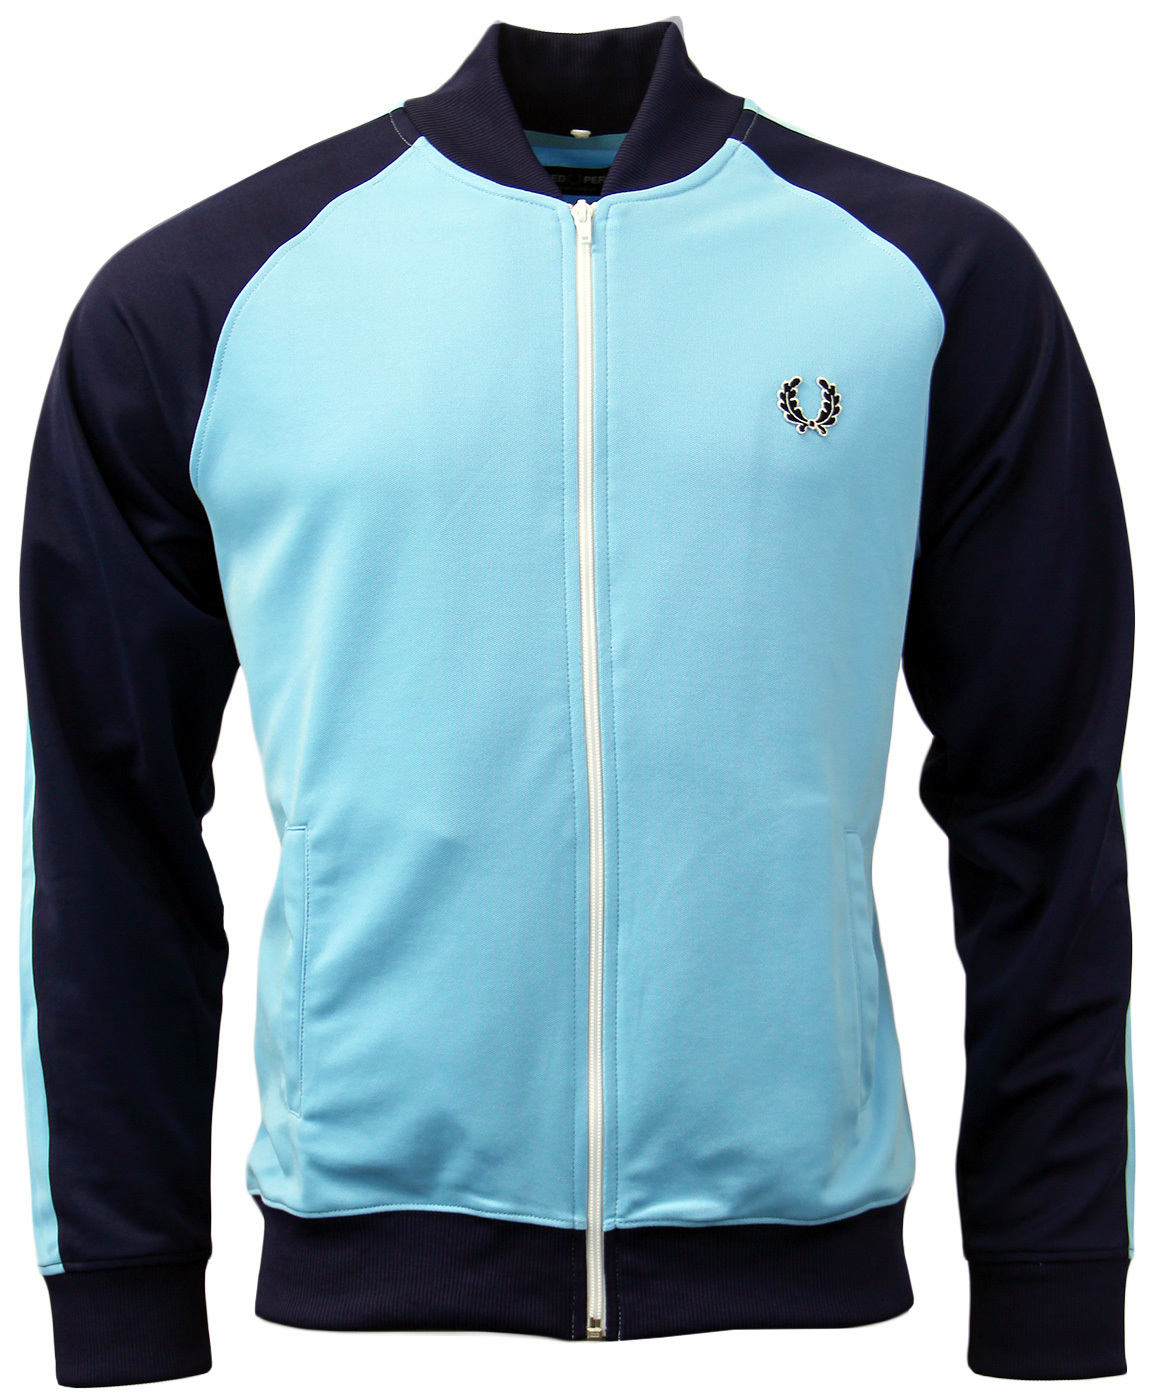 FRED PERRY Retro 70s Mod Bomber Collar Track Top in Blue